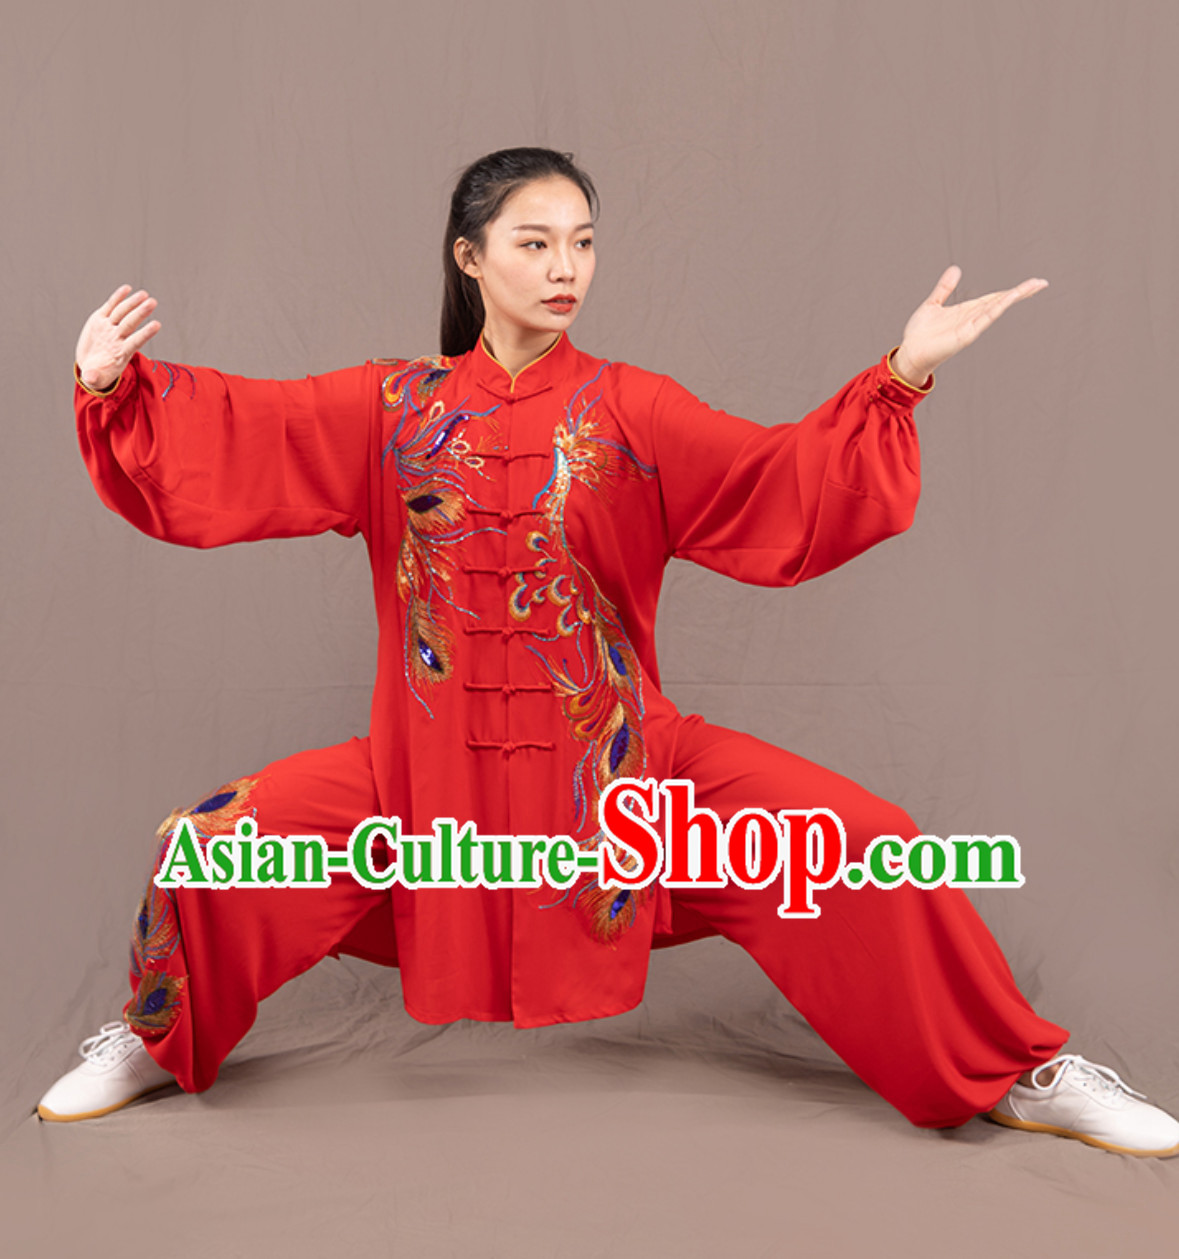 Top Chinese Traditional Competition Championship Professional Tai Chi Uniforms Taiji Kung Fu Wing Chun Kungfu Tai Ji Sword Gong Fu Master Clothing Suits Clothes Complete Set for Women